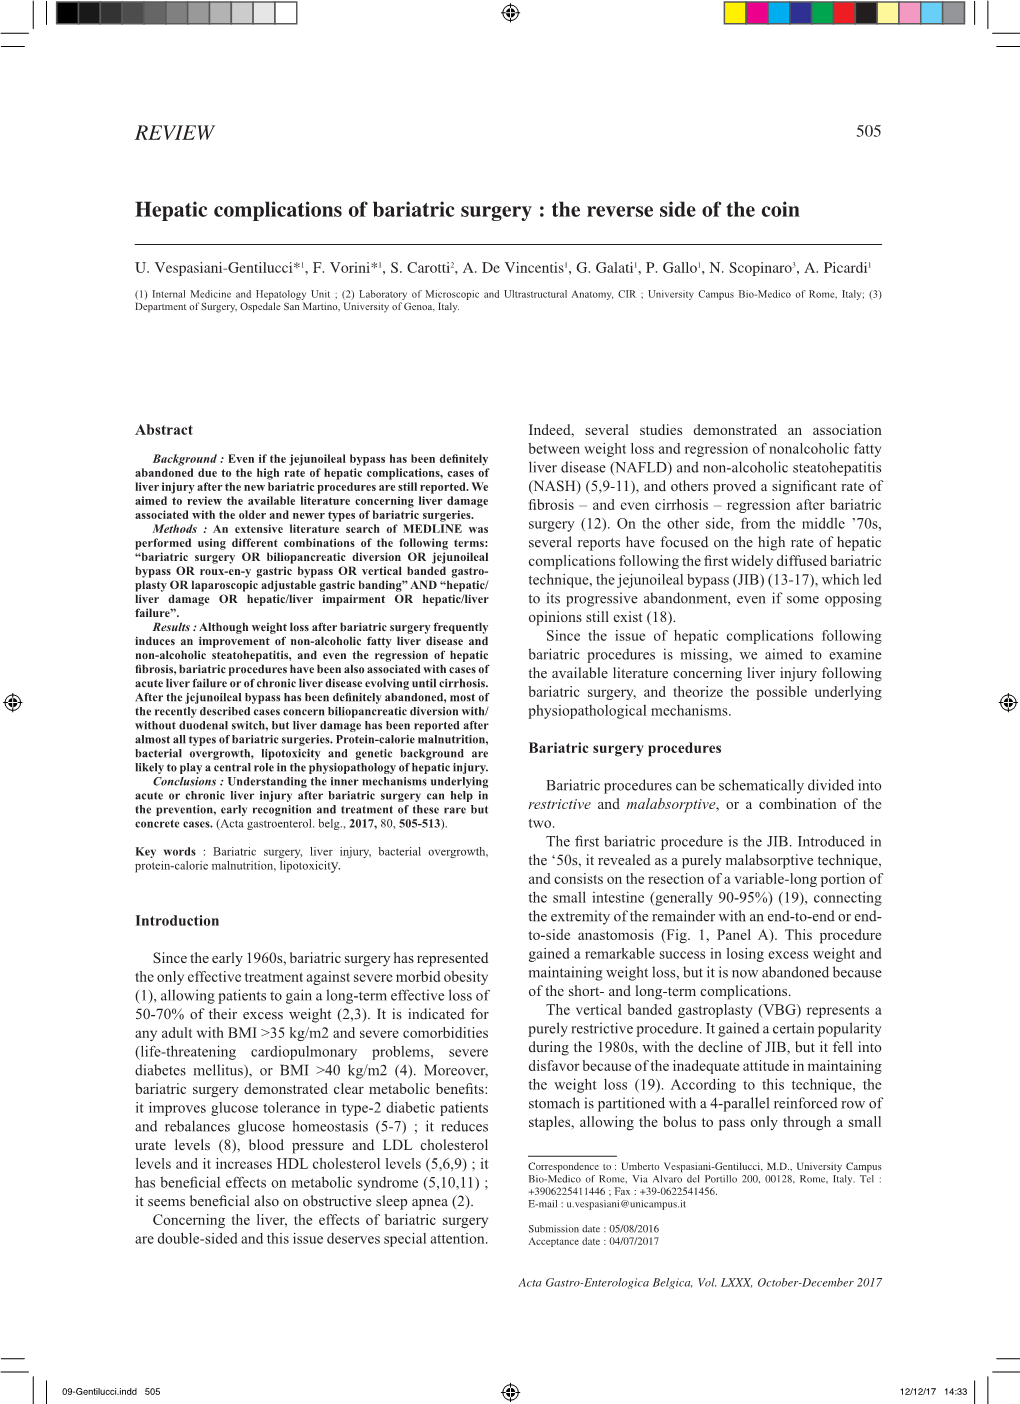 Hepatic Complications of Bariatric Surgery : the Reverse Side of the Coin